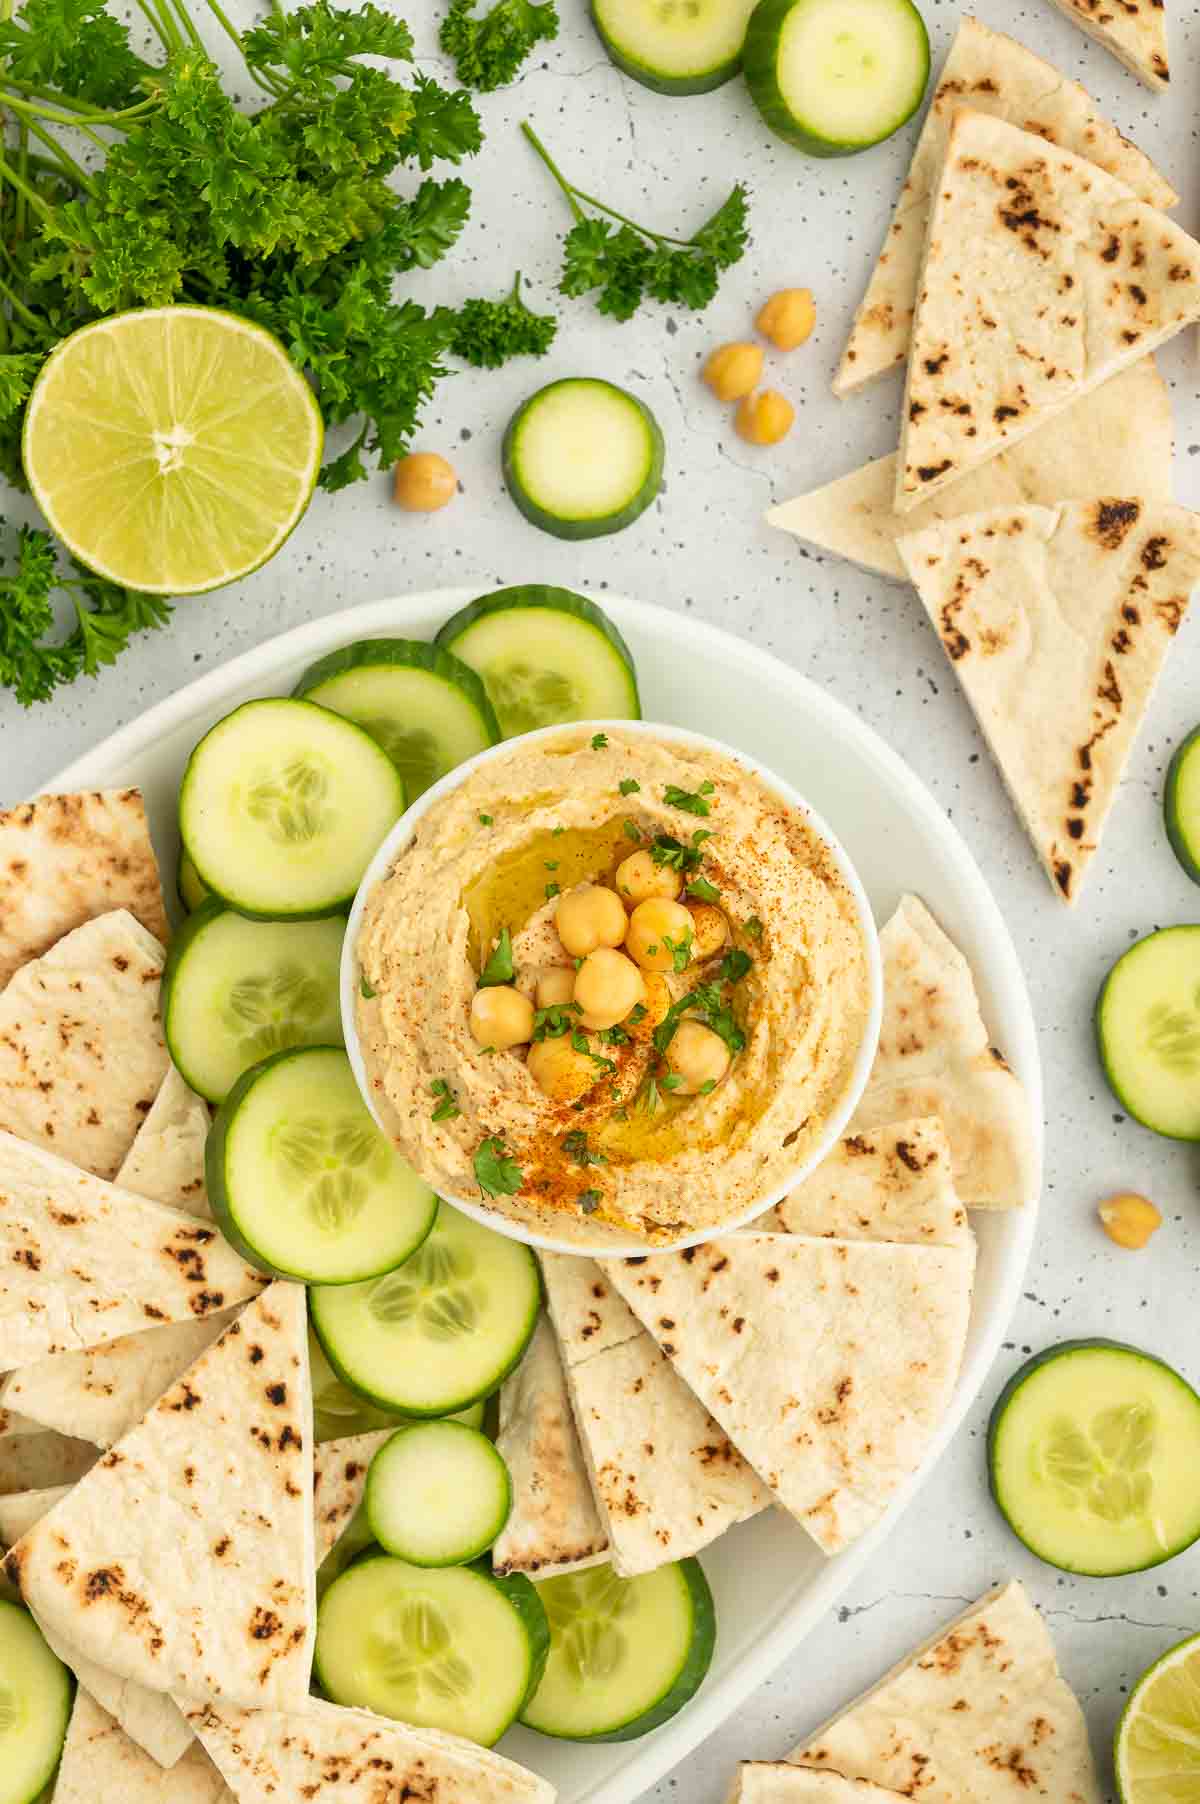 A plate with hummus, pita, and cucumbers.